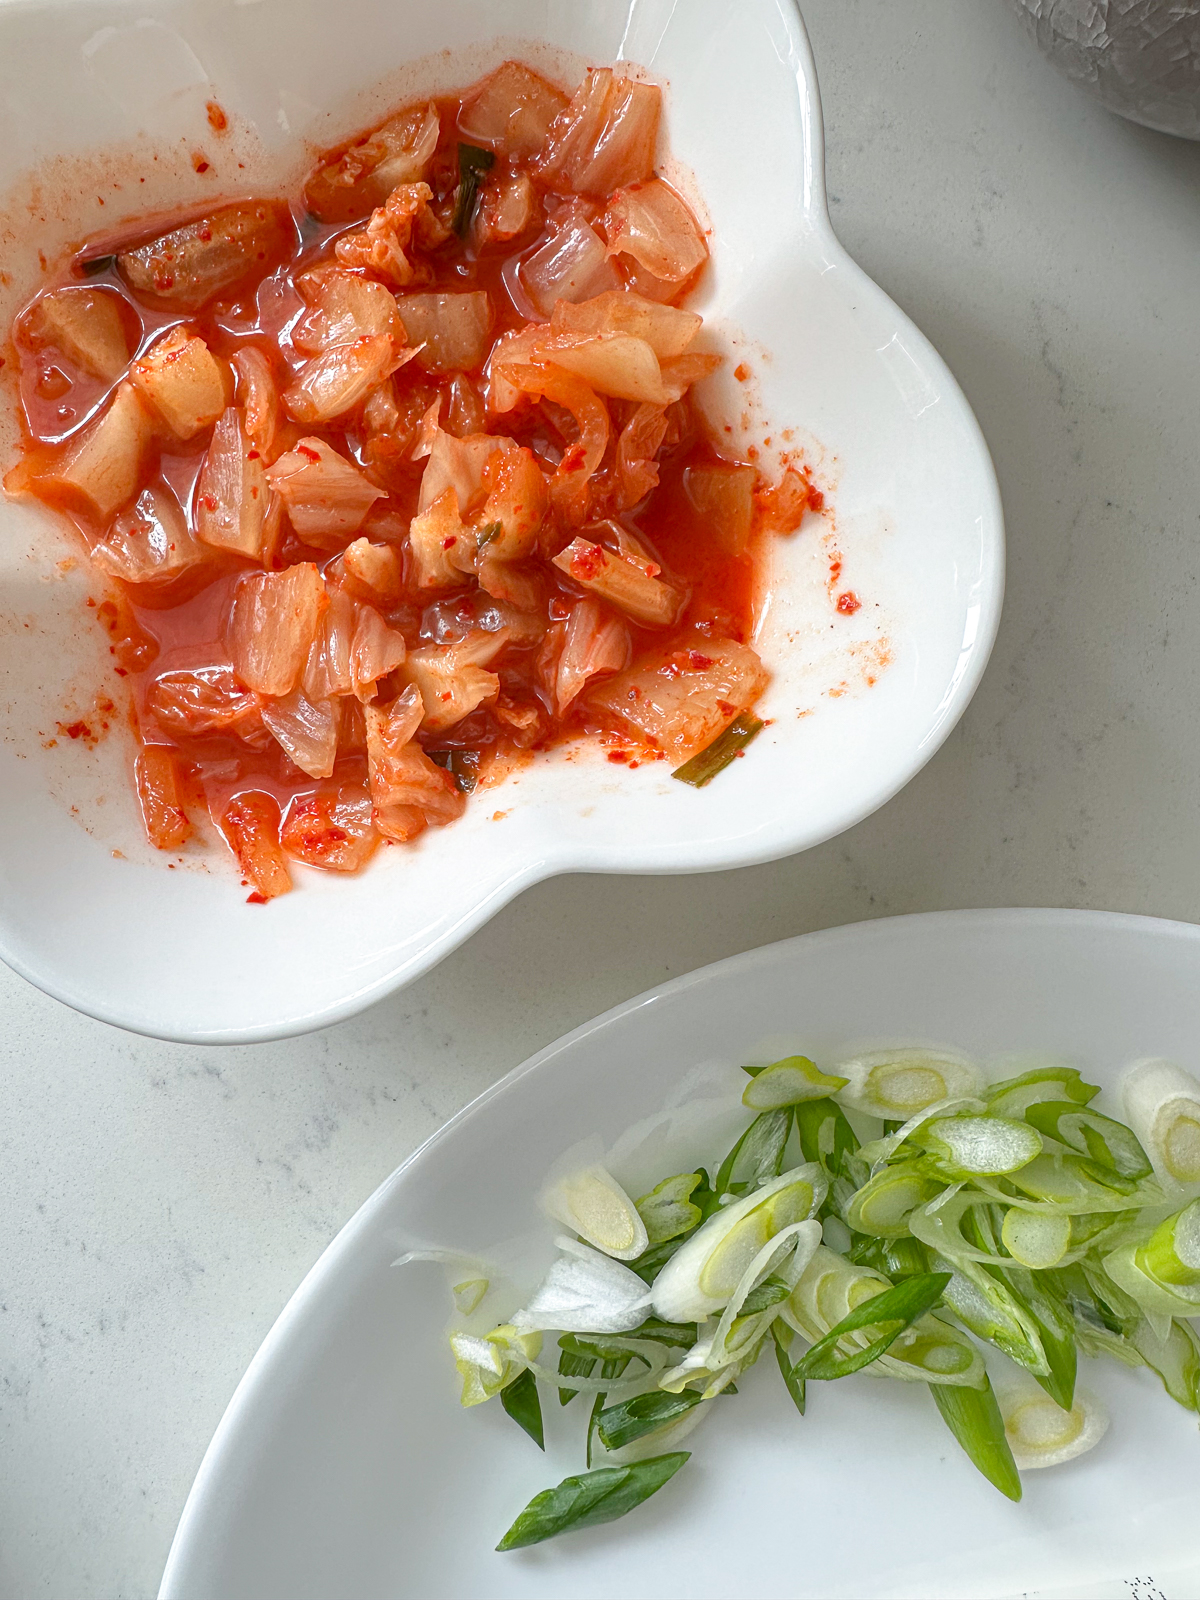 Cut kimchi and sliced green onions in a bowl.